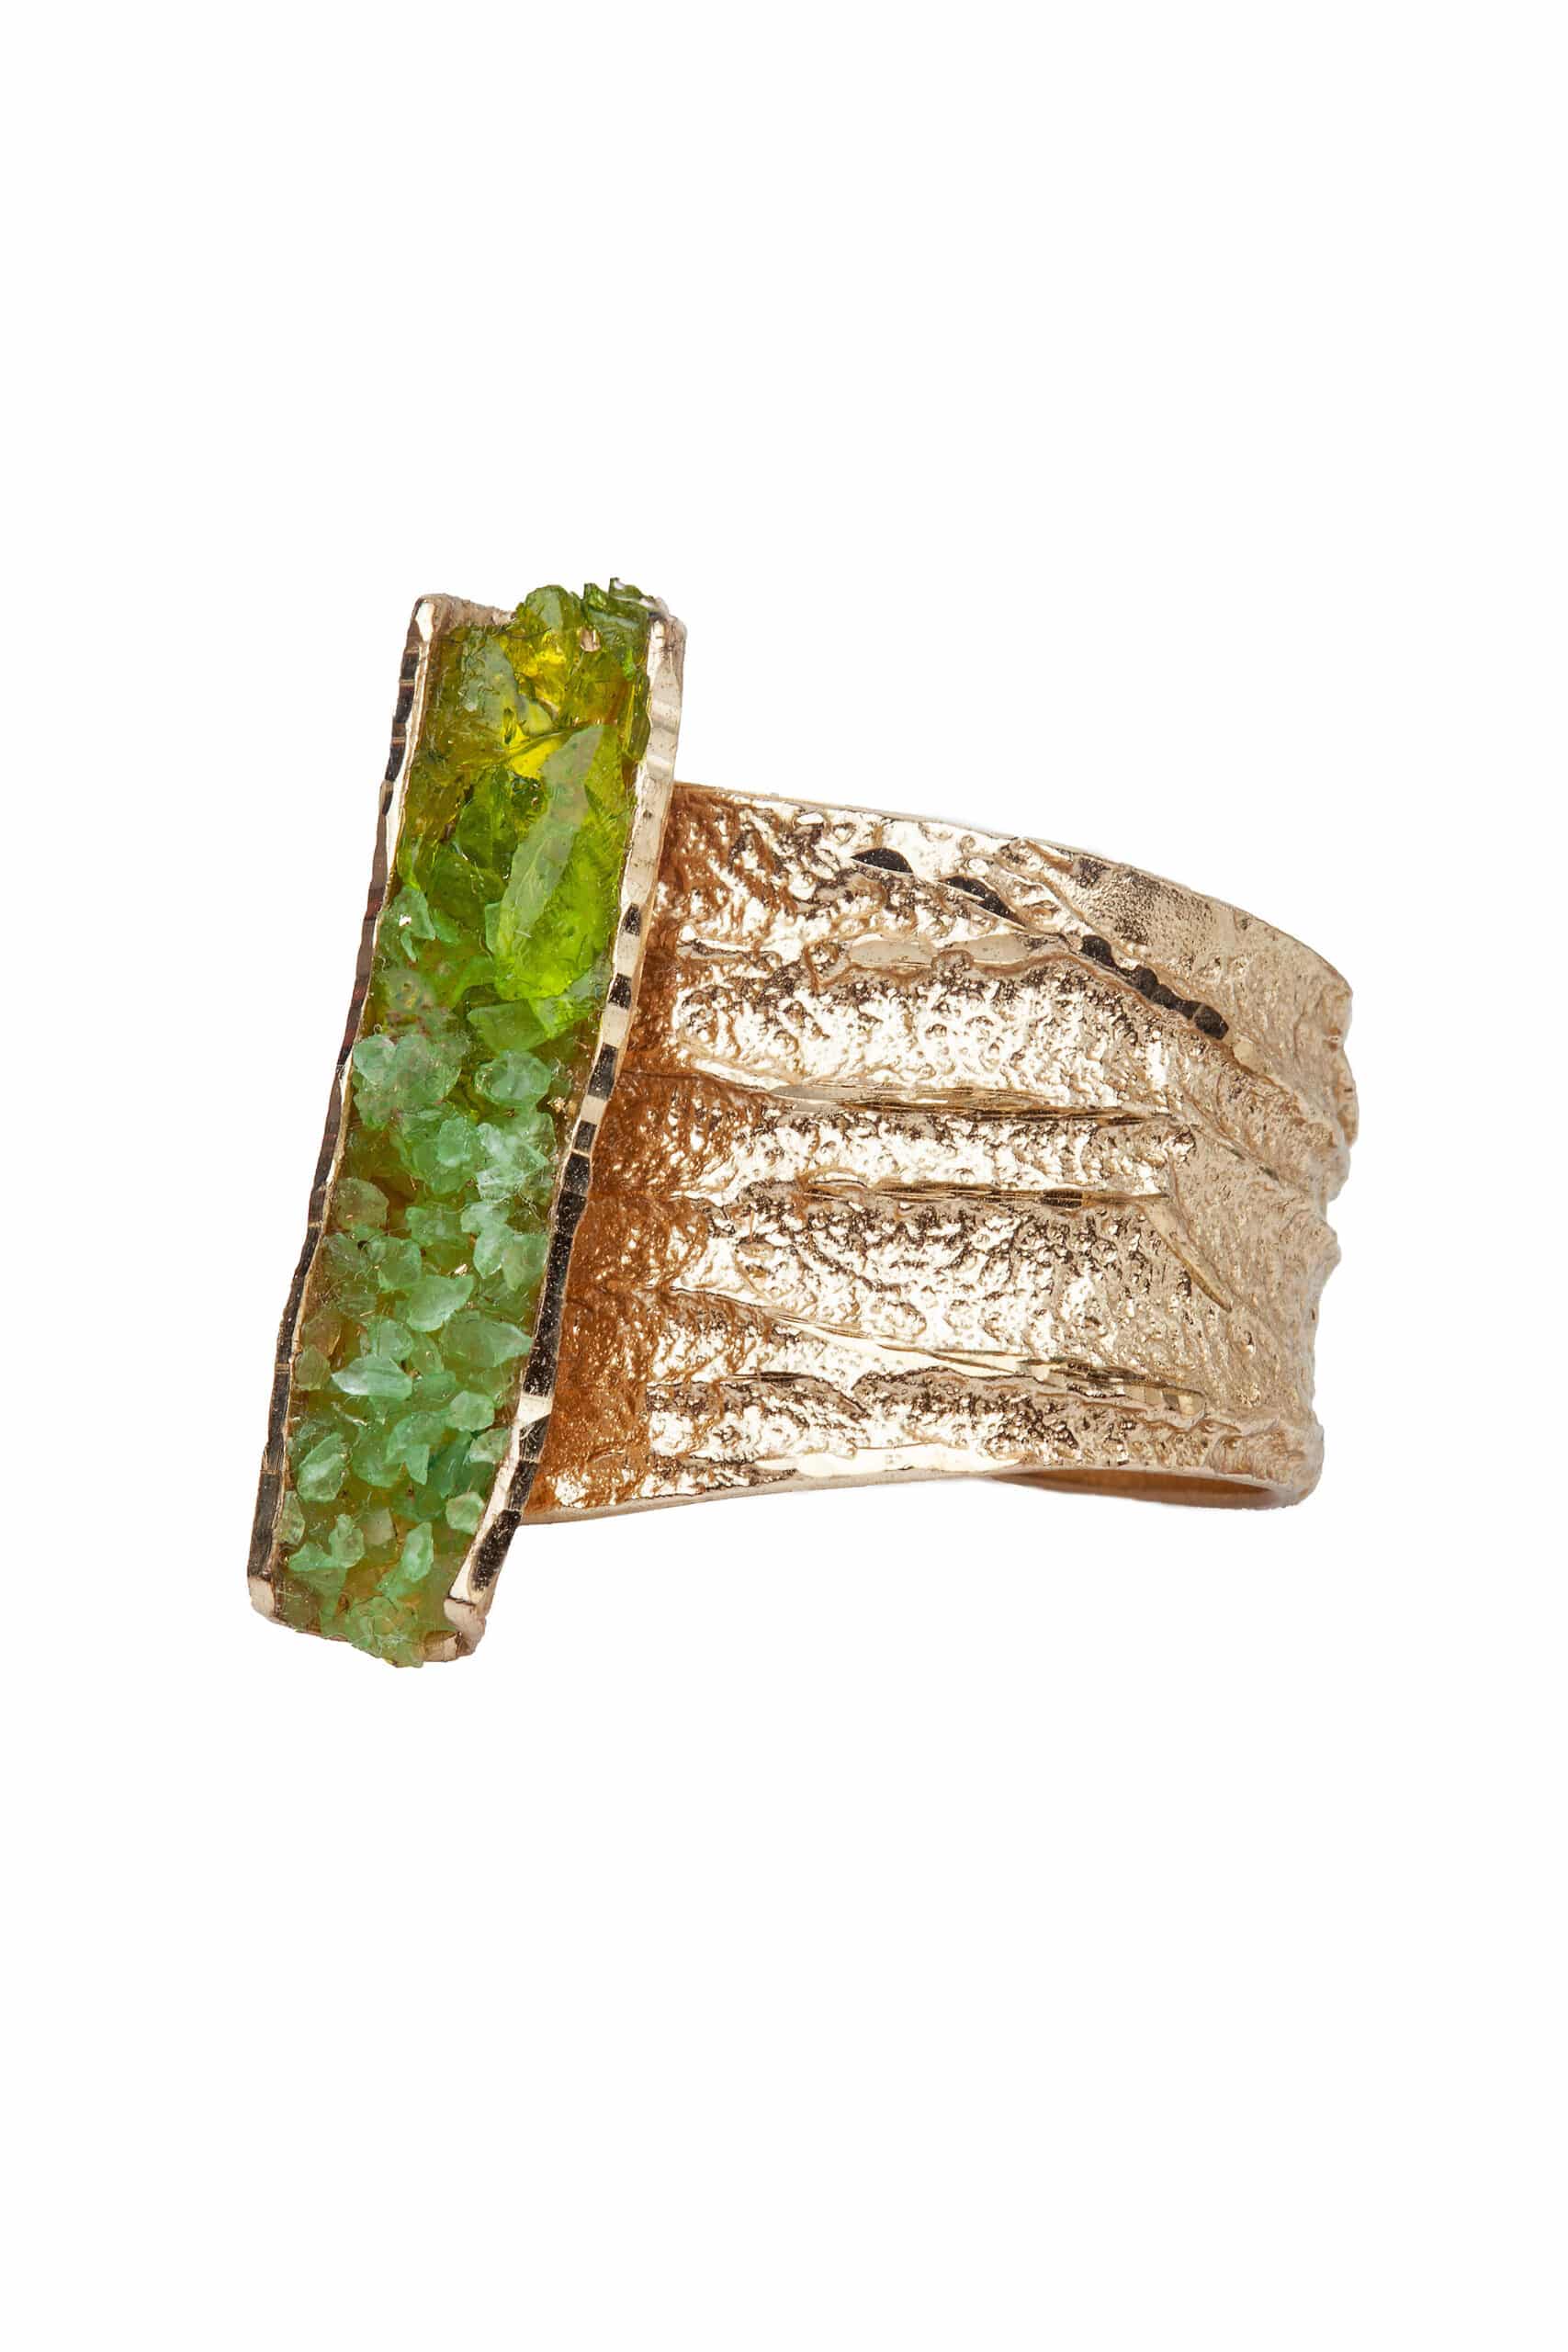 Unique bronze ring with gold patina and green crystals gallery 1